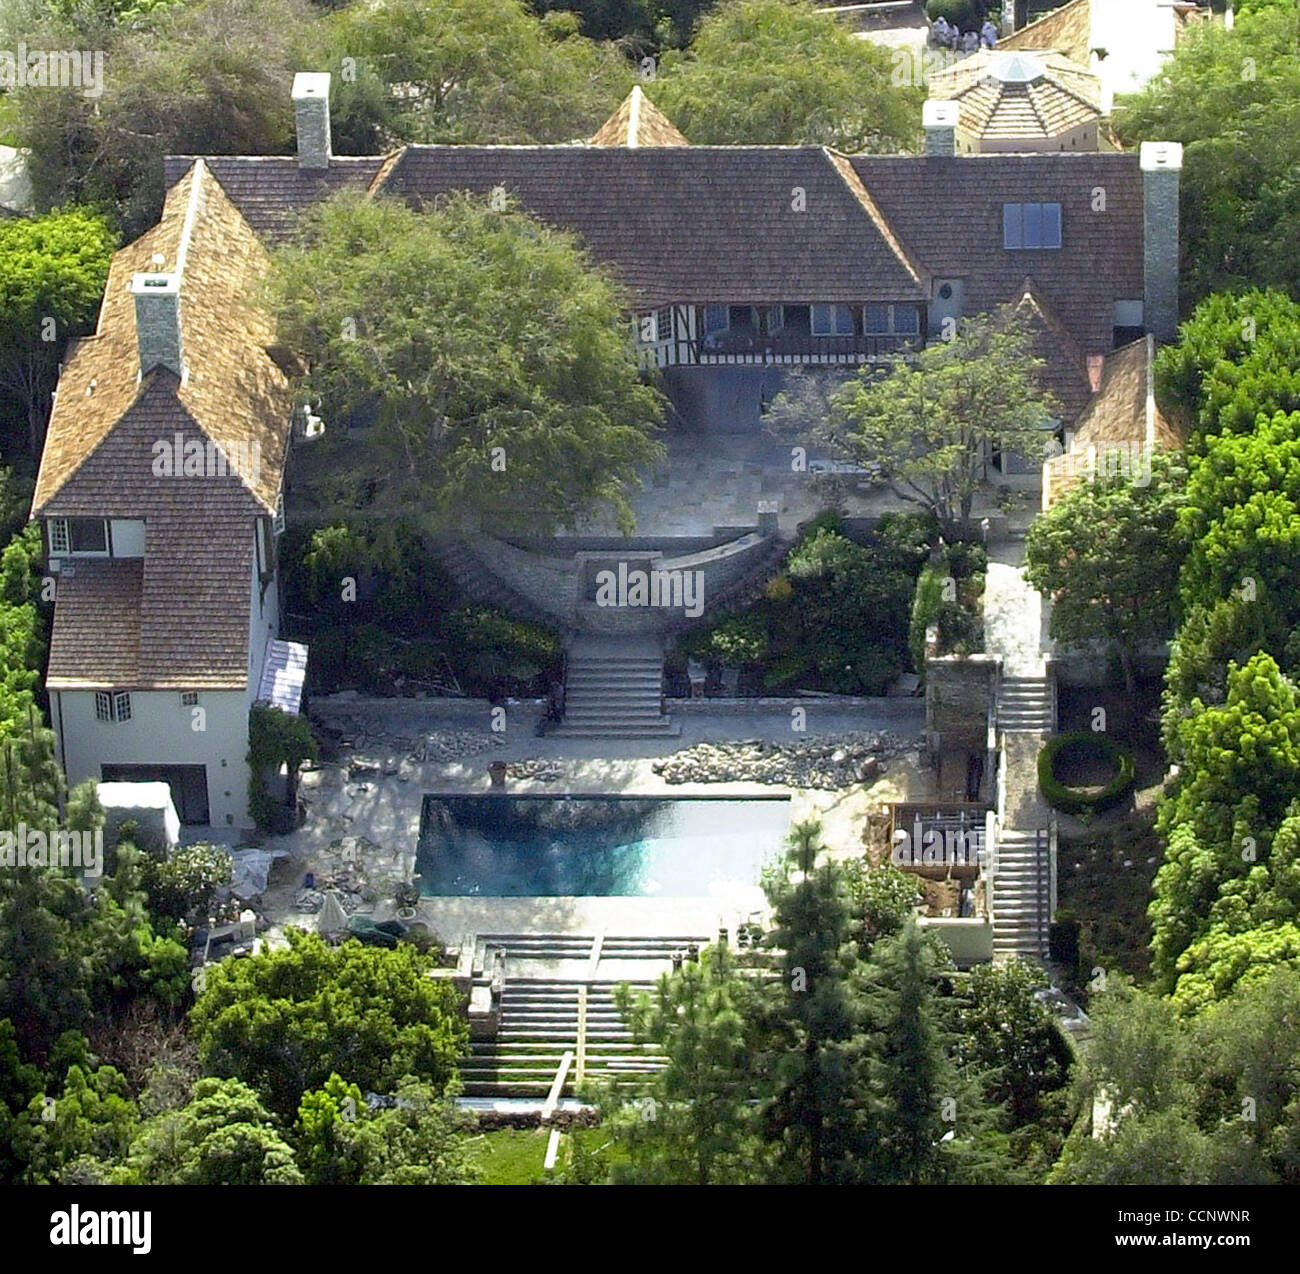 Jan 25, 2003; Beverly Hills, CA, USA; 18 months after they paid 3.5 million for this mansion, actors Brad Pitt and Jennifer Aniston have yet to move in. Pitt recently filed new plans with Beverly Hills city officials which include the addition of a 10-by-6-foot spa and a second-story gym. They are a Stock Photo